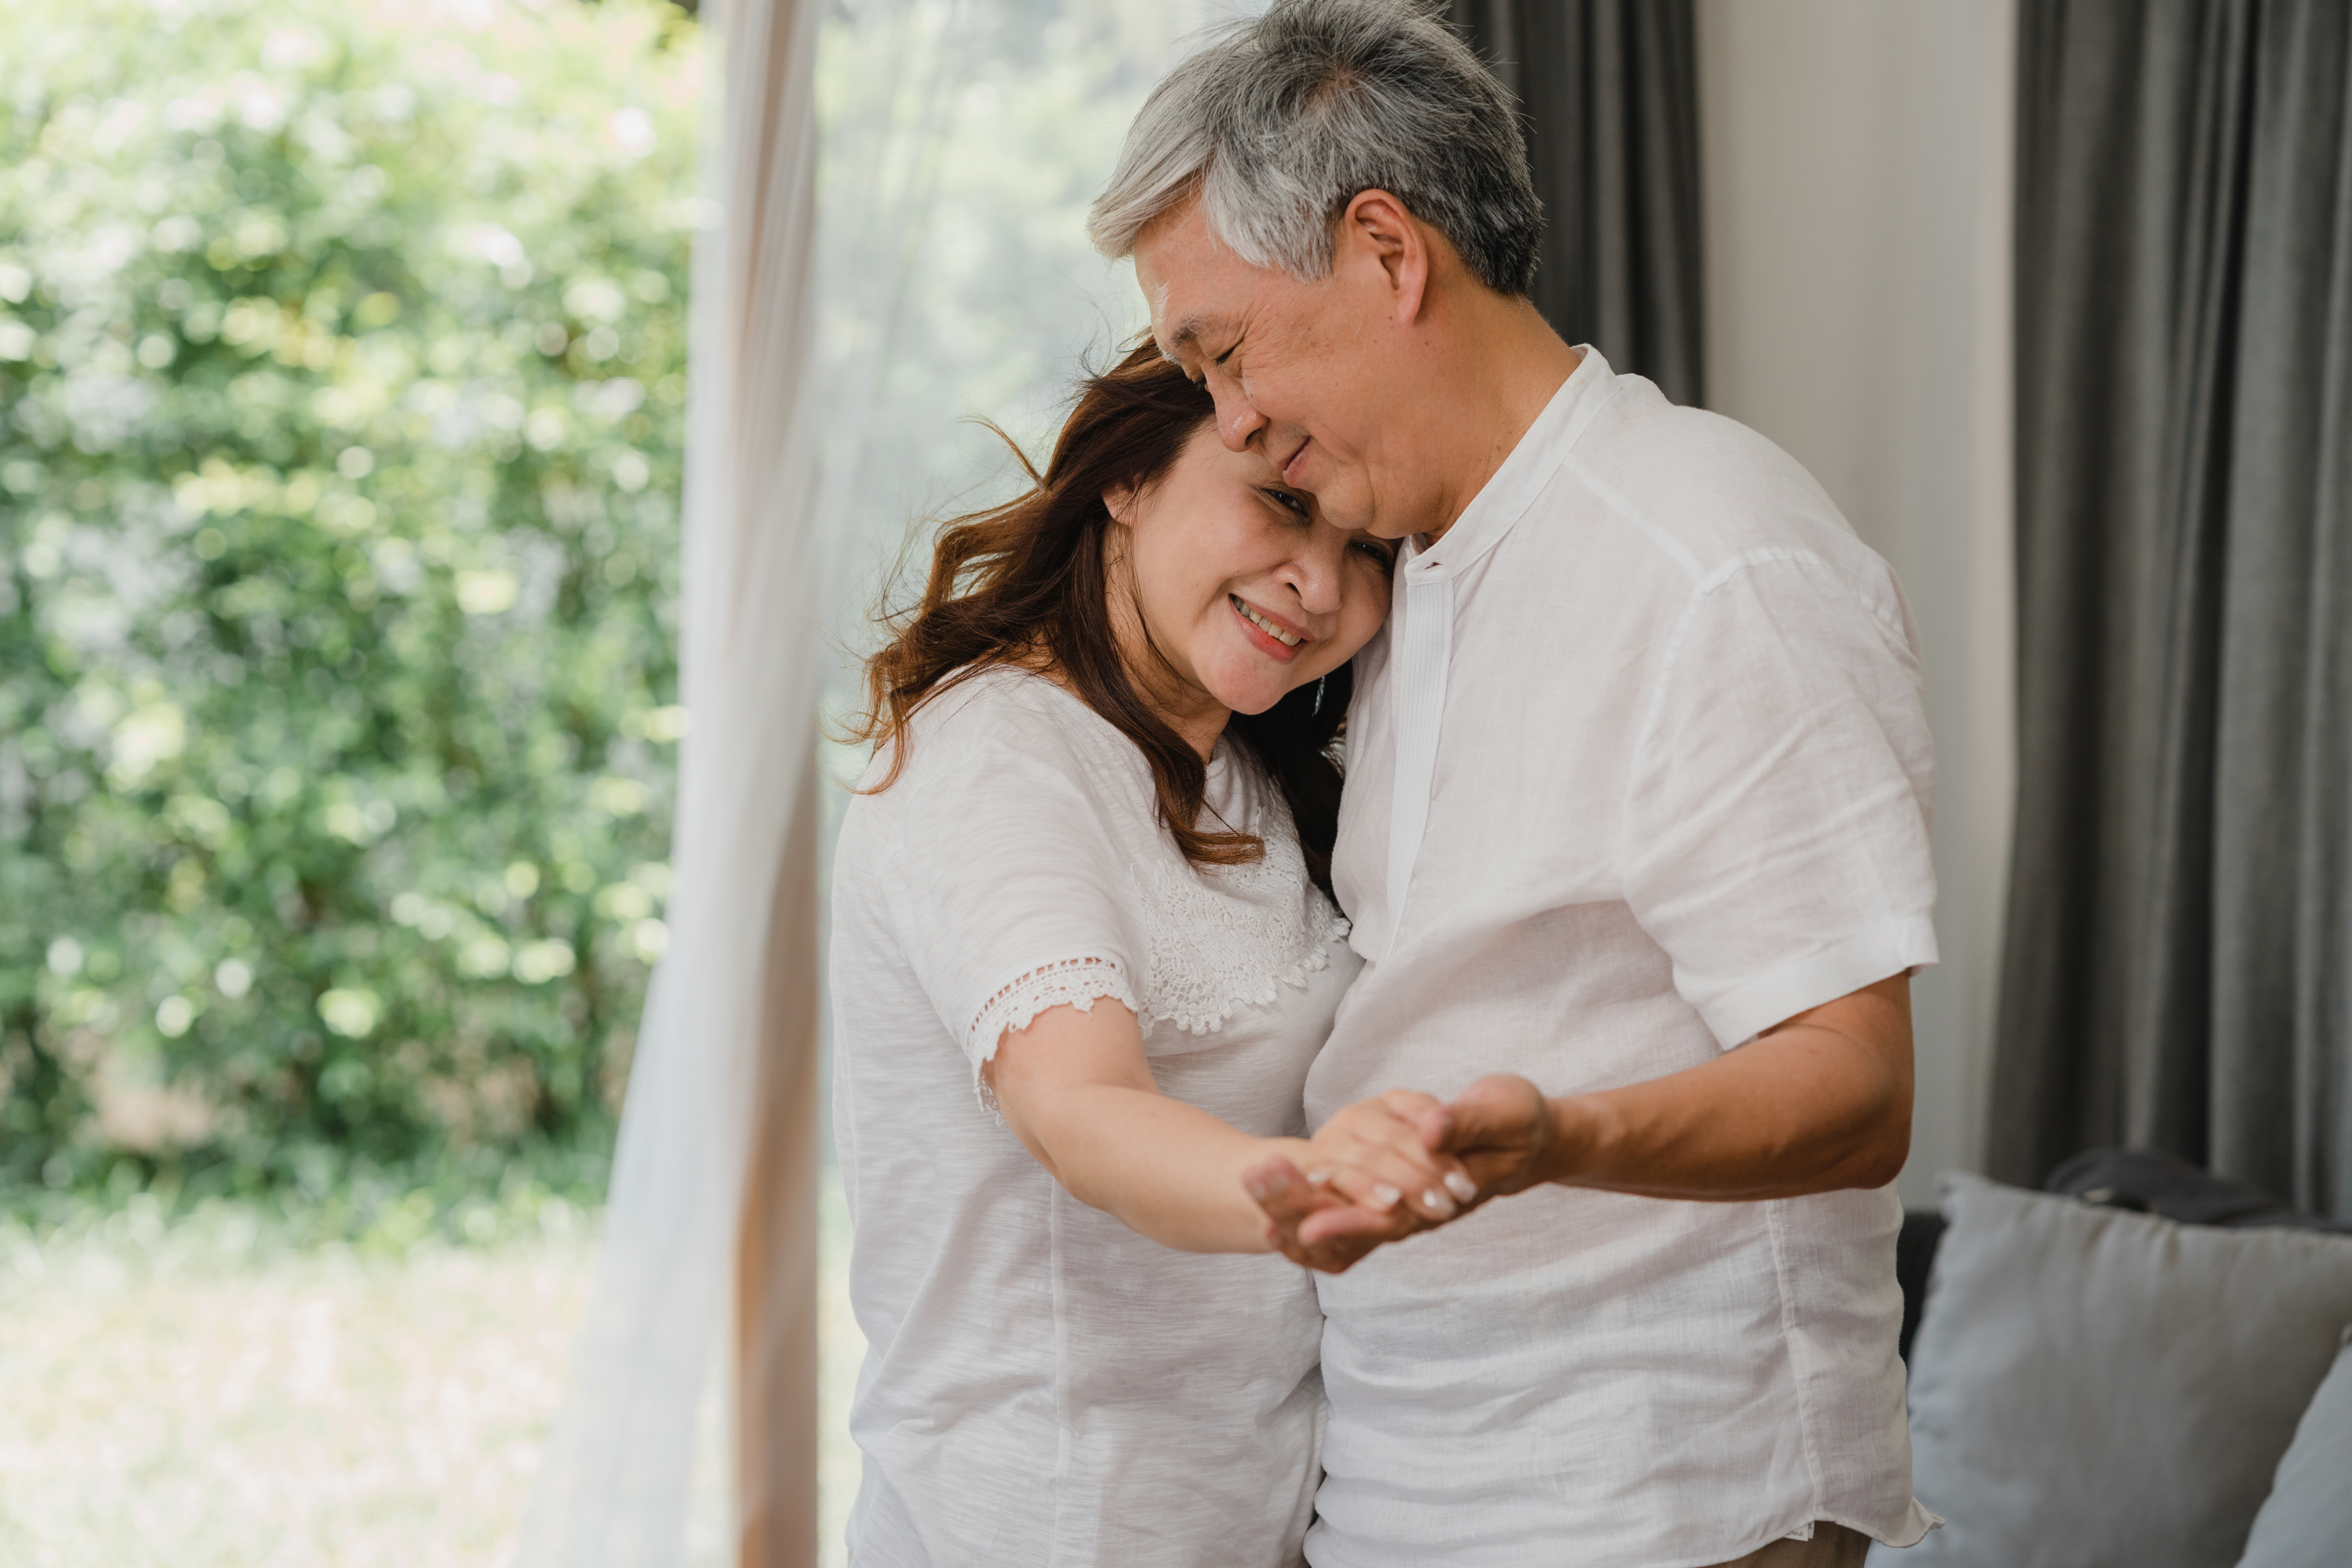 https://img.moneyduck.com/article_attachment/1661308312-asian-elderly-couple-dancing-together-while-listen-music-living-room-home-sweet-couple-enjoy-love-moment-while-having-fun-when-relaxed-home-lifestyle-senior-family-relax-home-concept.jpg